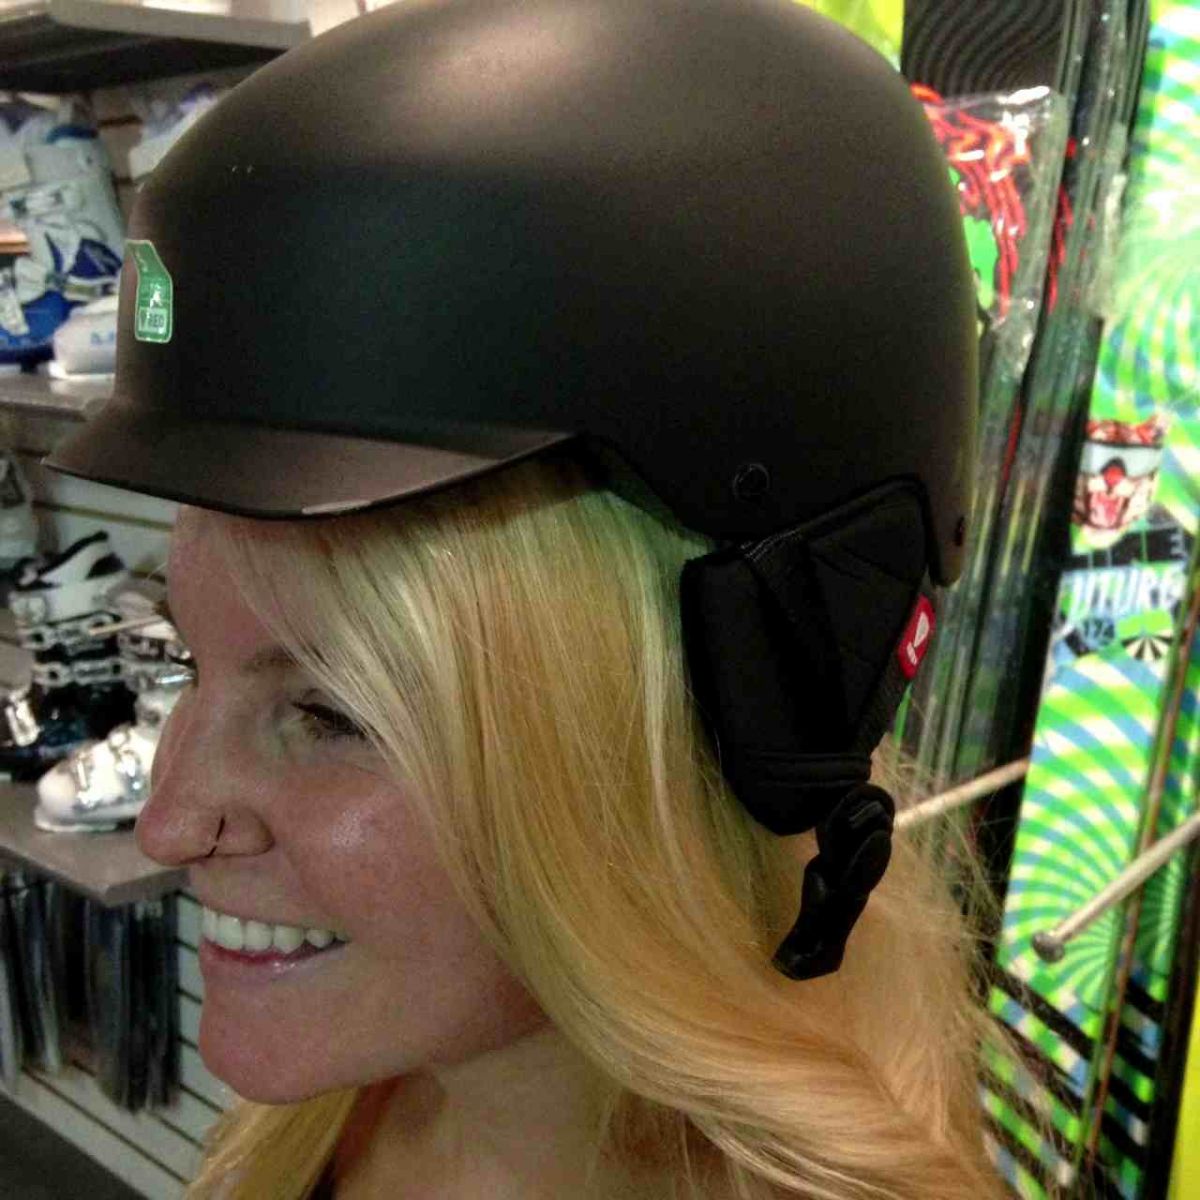 How to fit a helmet properly, Helmet size too small